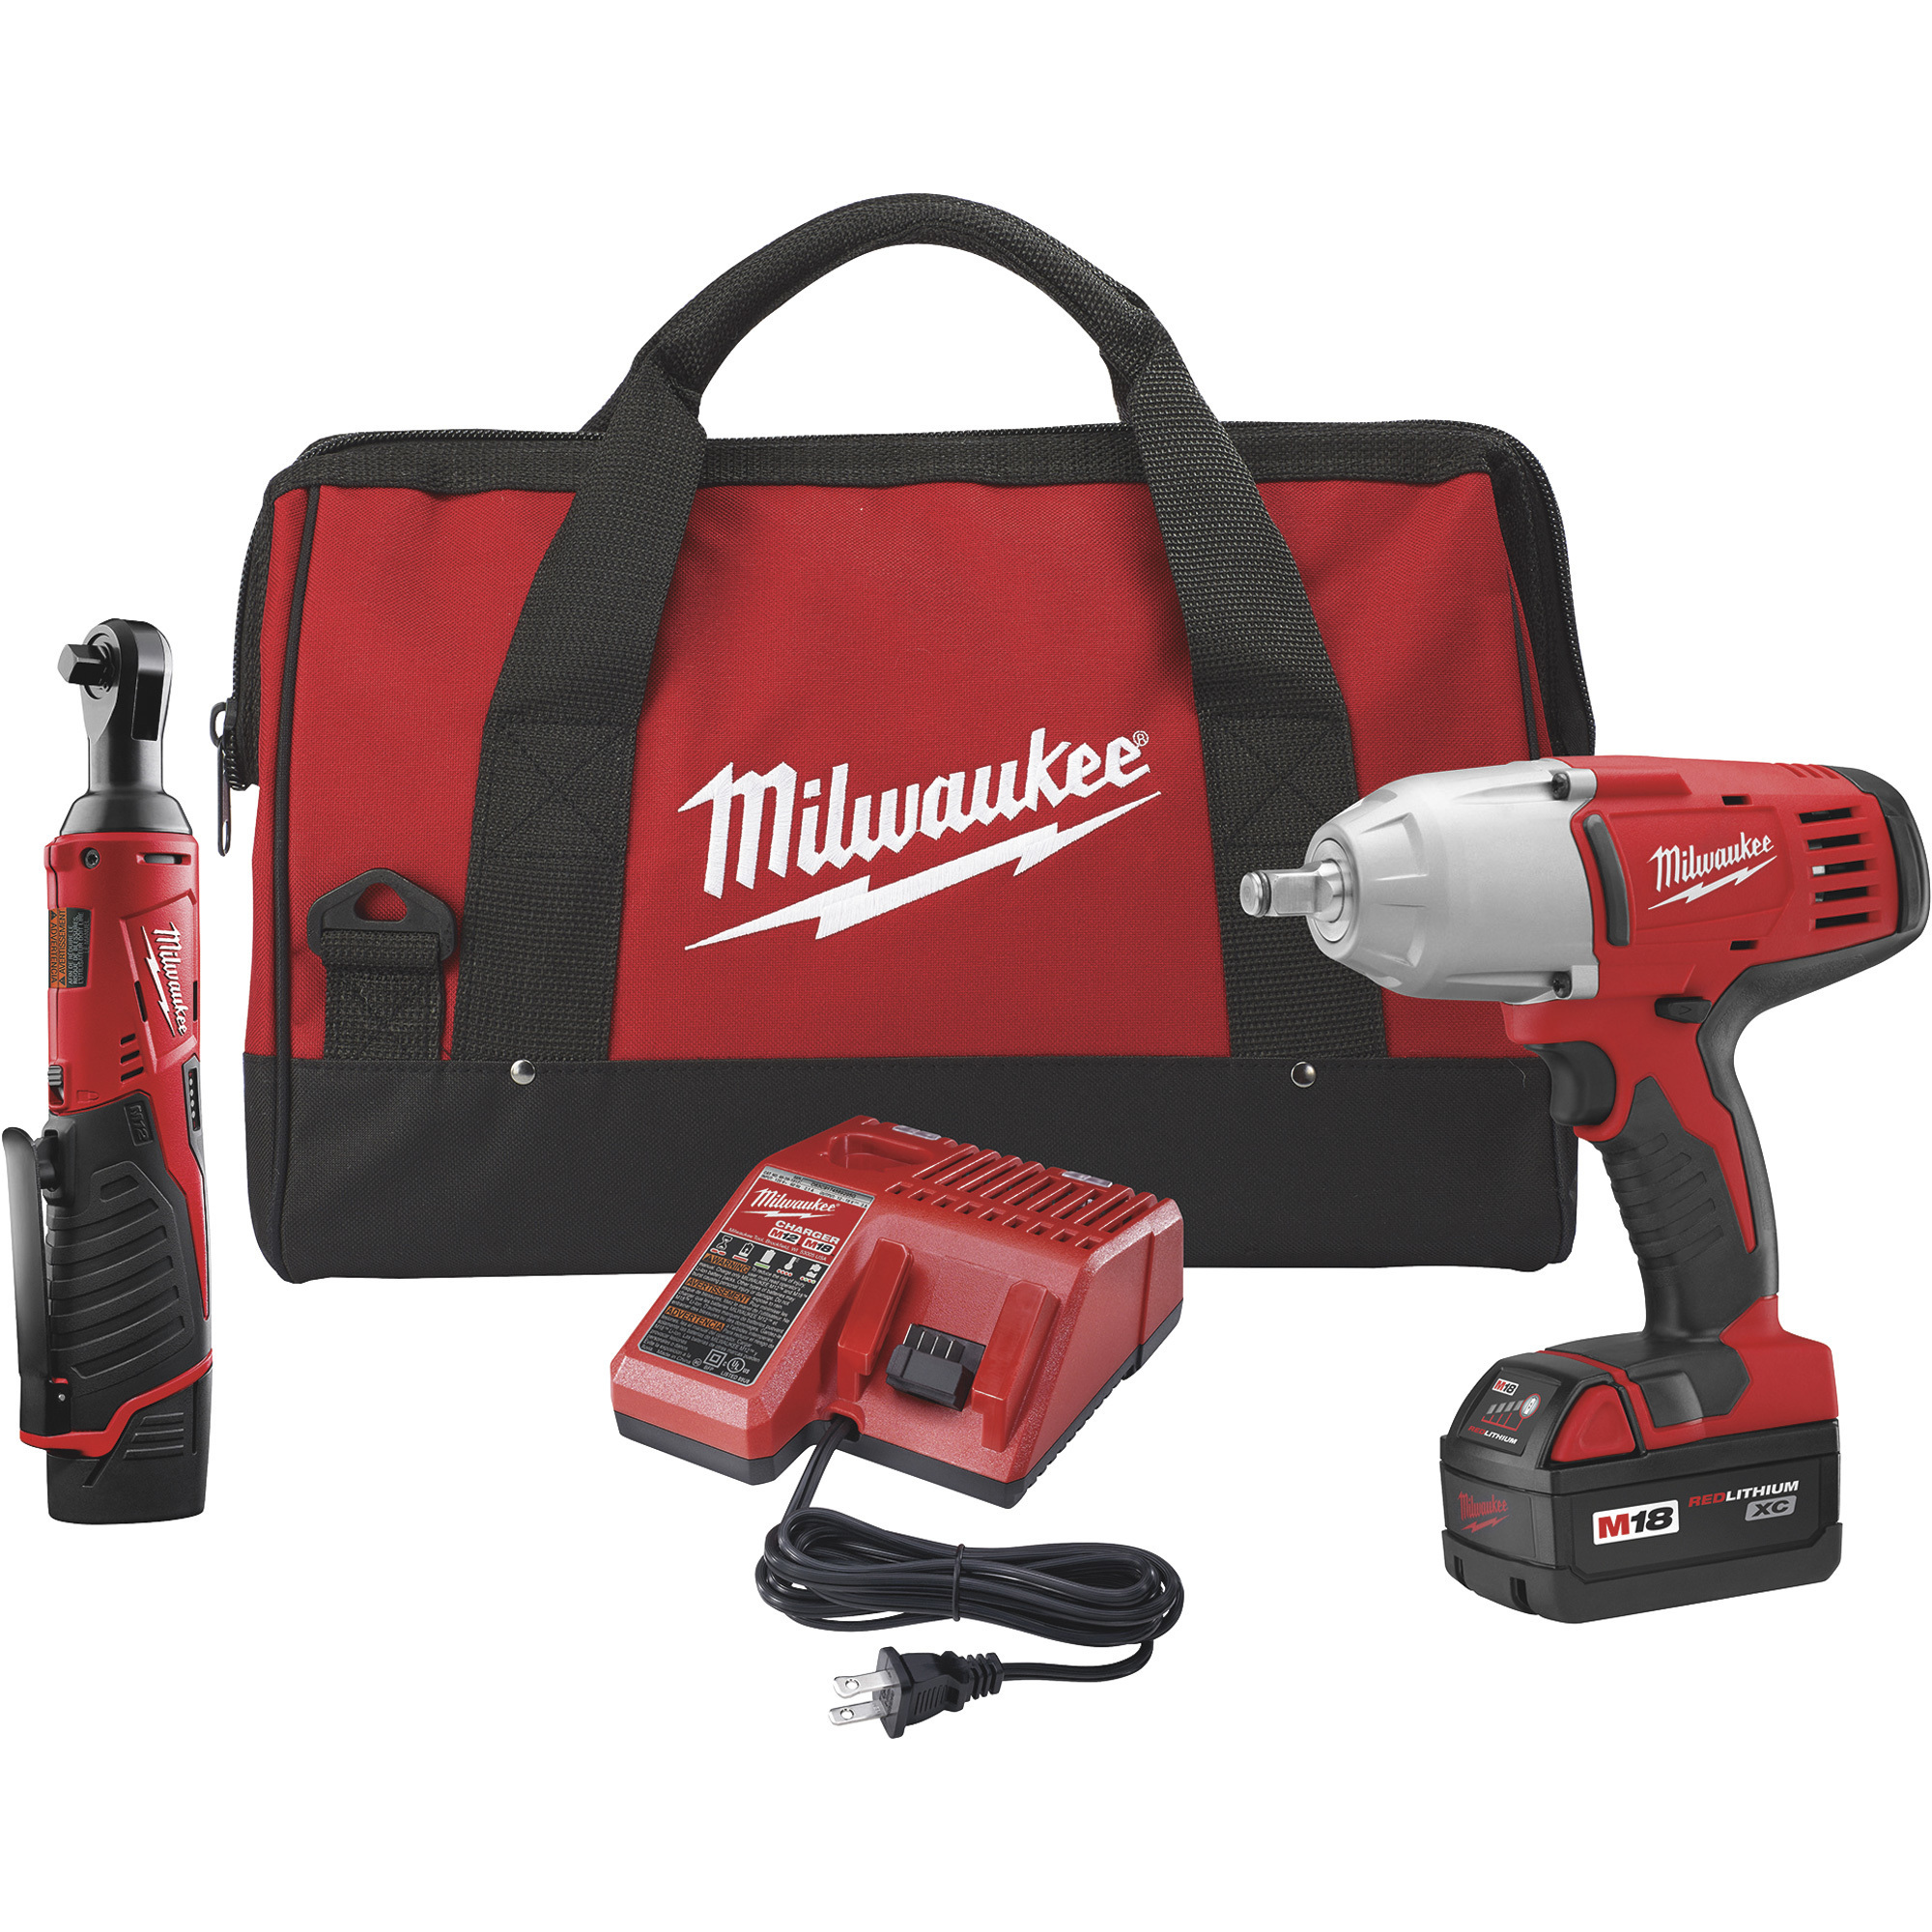 SPECIAL BUY! Milwaukee M18 Cordless 1/2in. High-Torque Impact